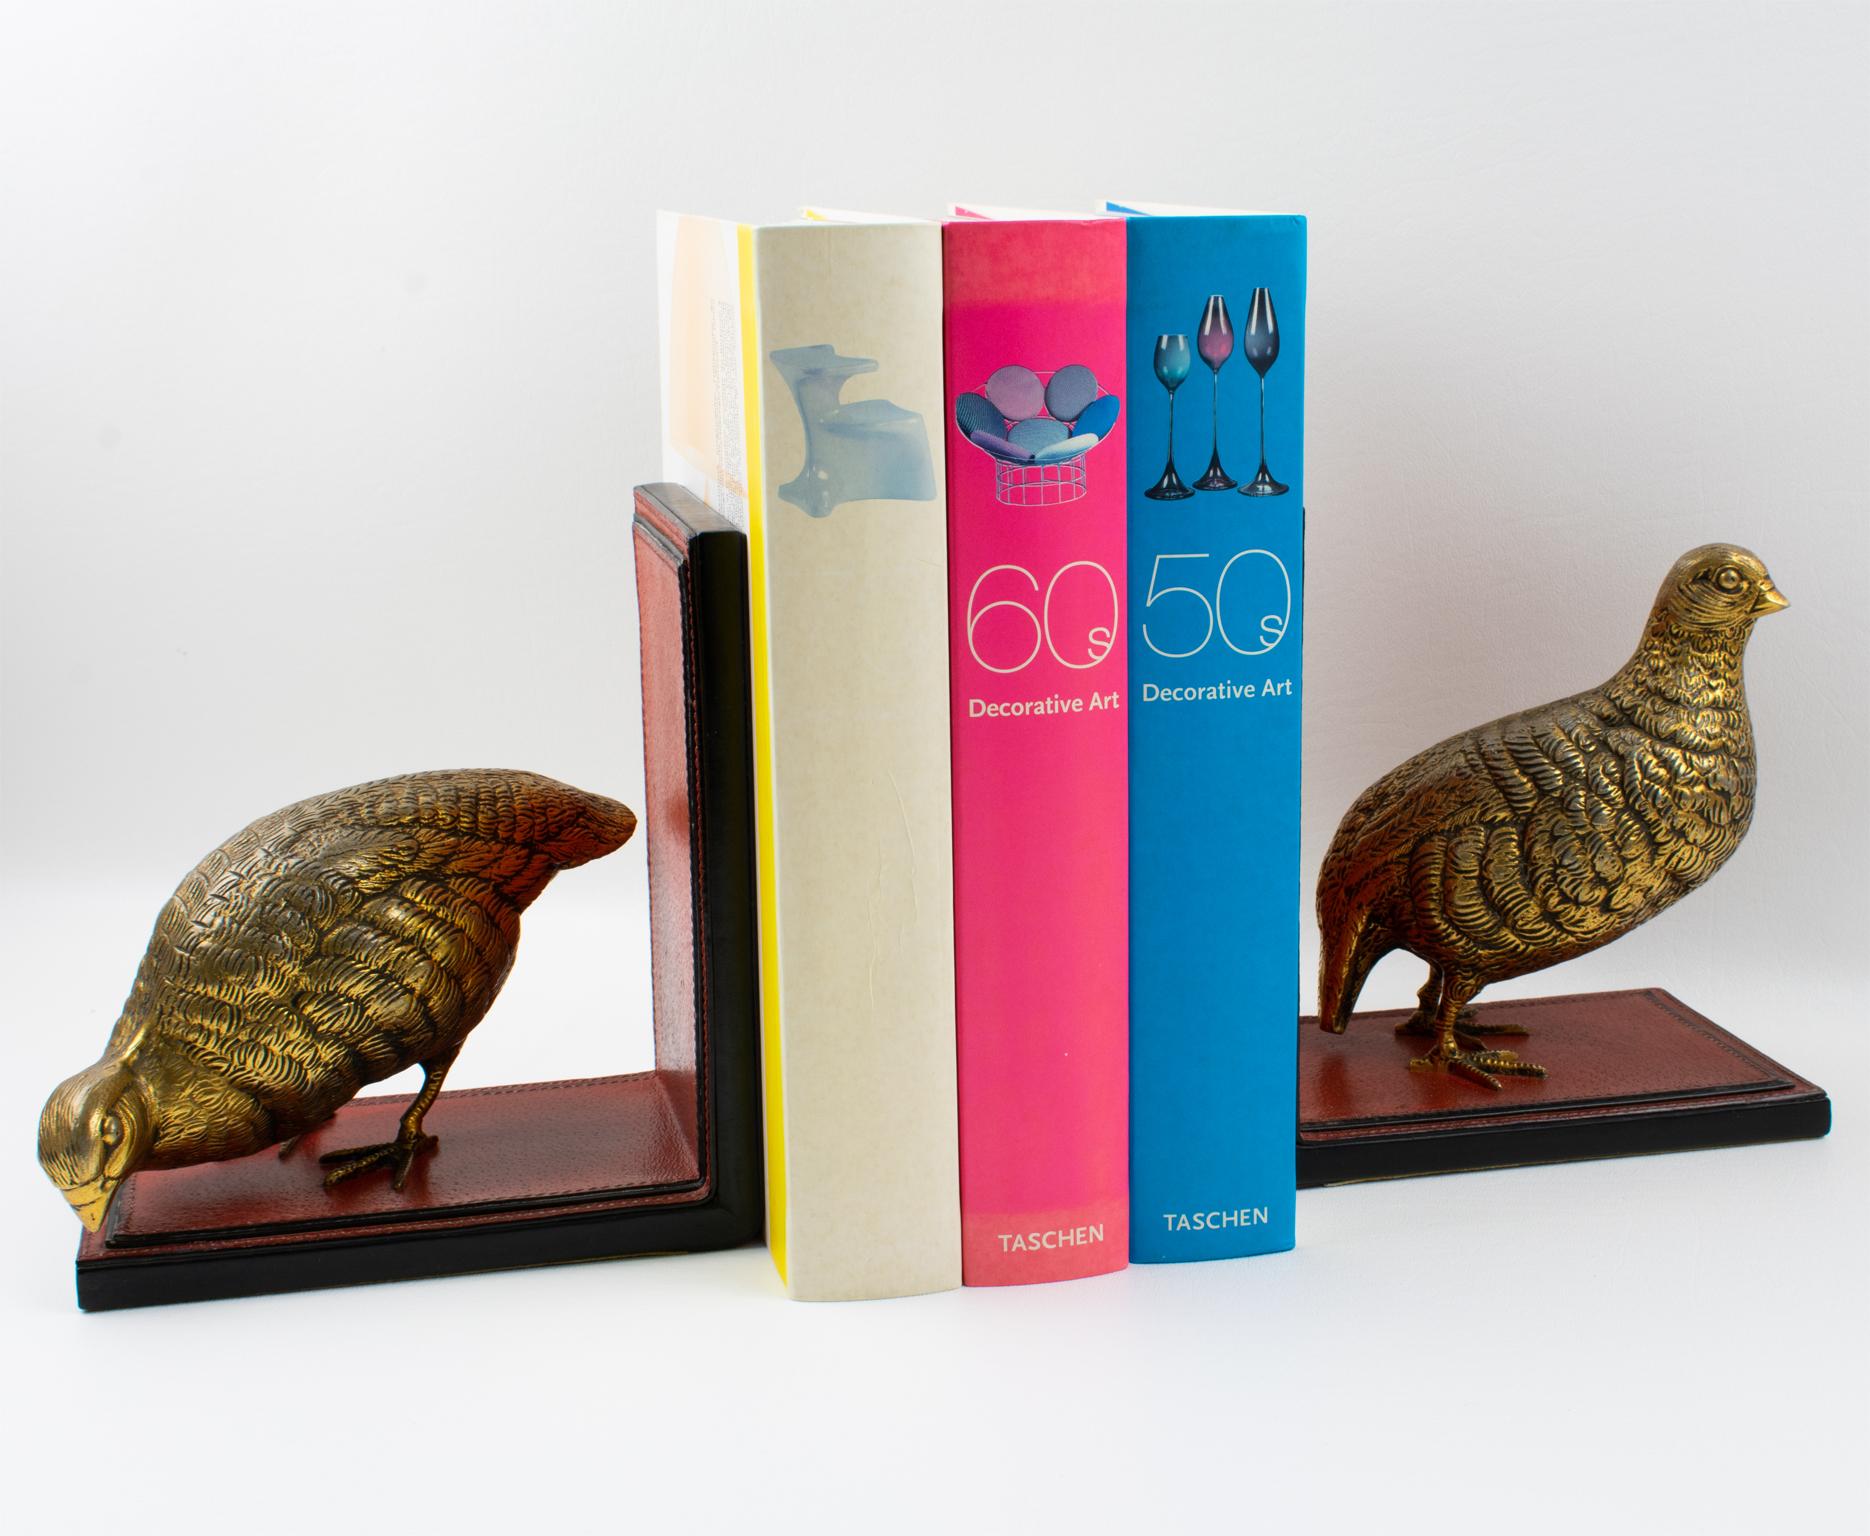 Gucci Italy Hand-Stitched Red Leather Bookends with Gilt Metal Partridges, 1970s For Sale 7